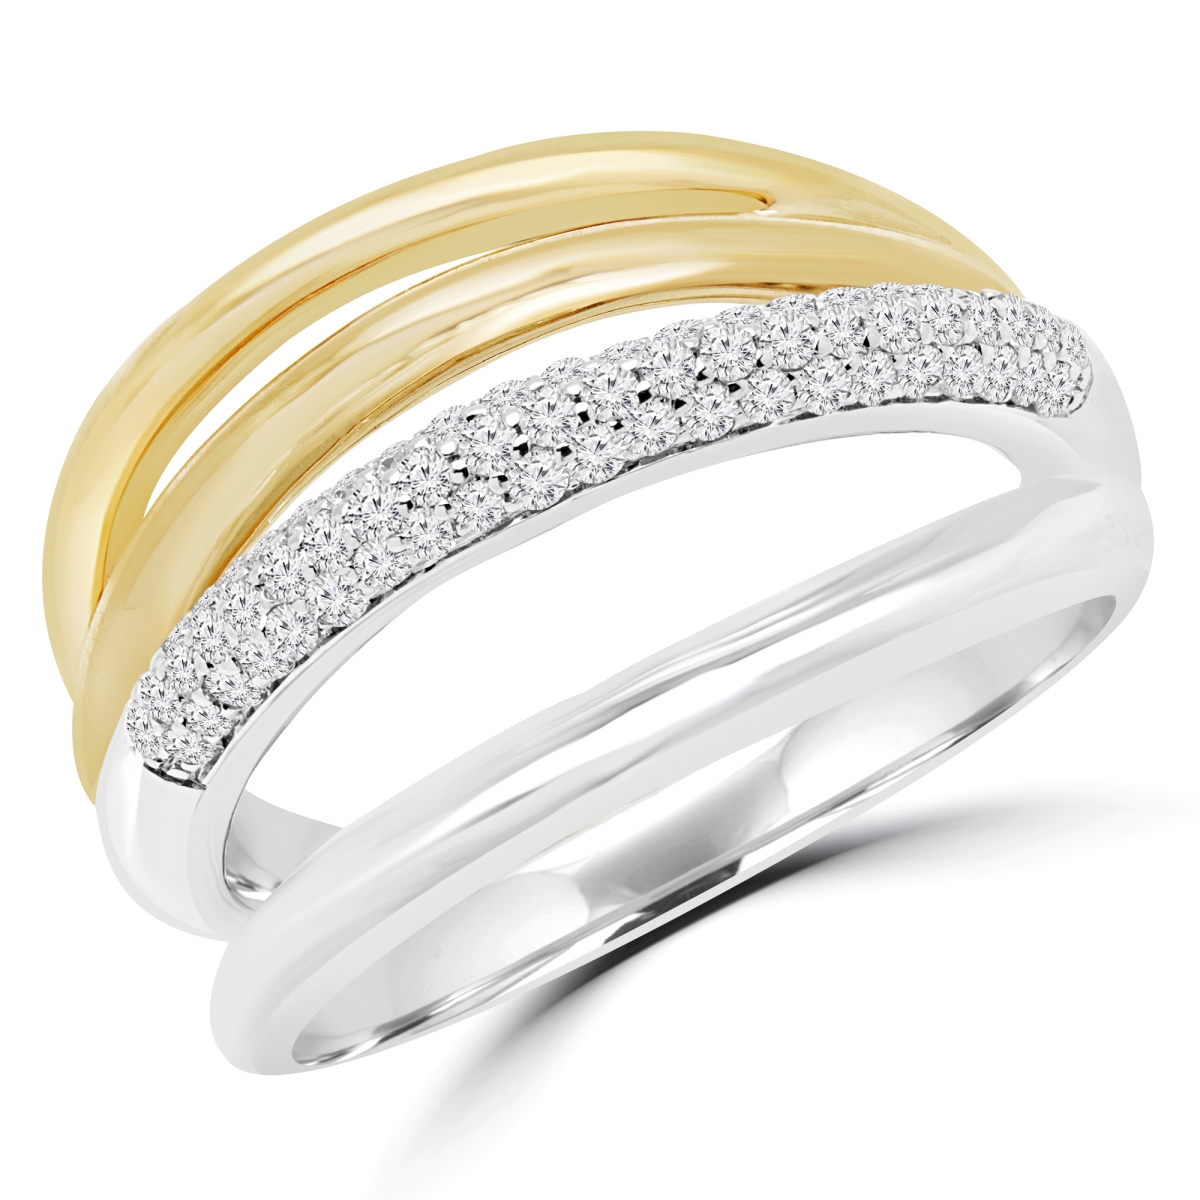 Picture of Majesty Diamonds MDR170050-3.75 0.37 CTW Round Diamond Cocktail Semi-Eternity Ring in 14K Two-Tone Gold - 3.75